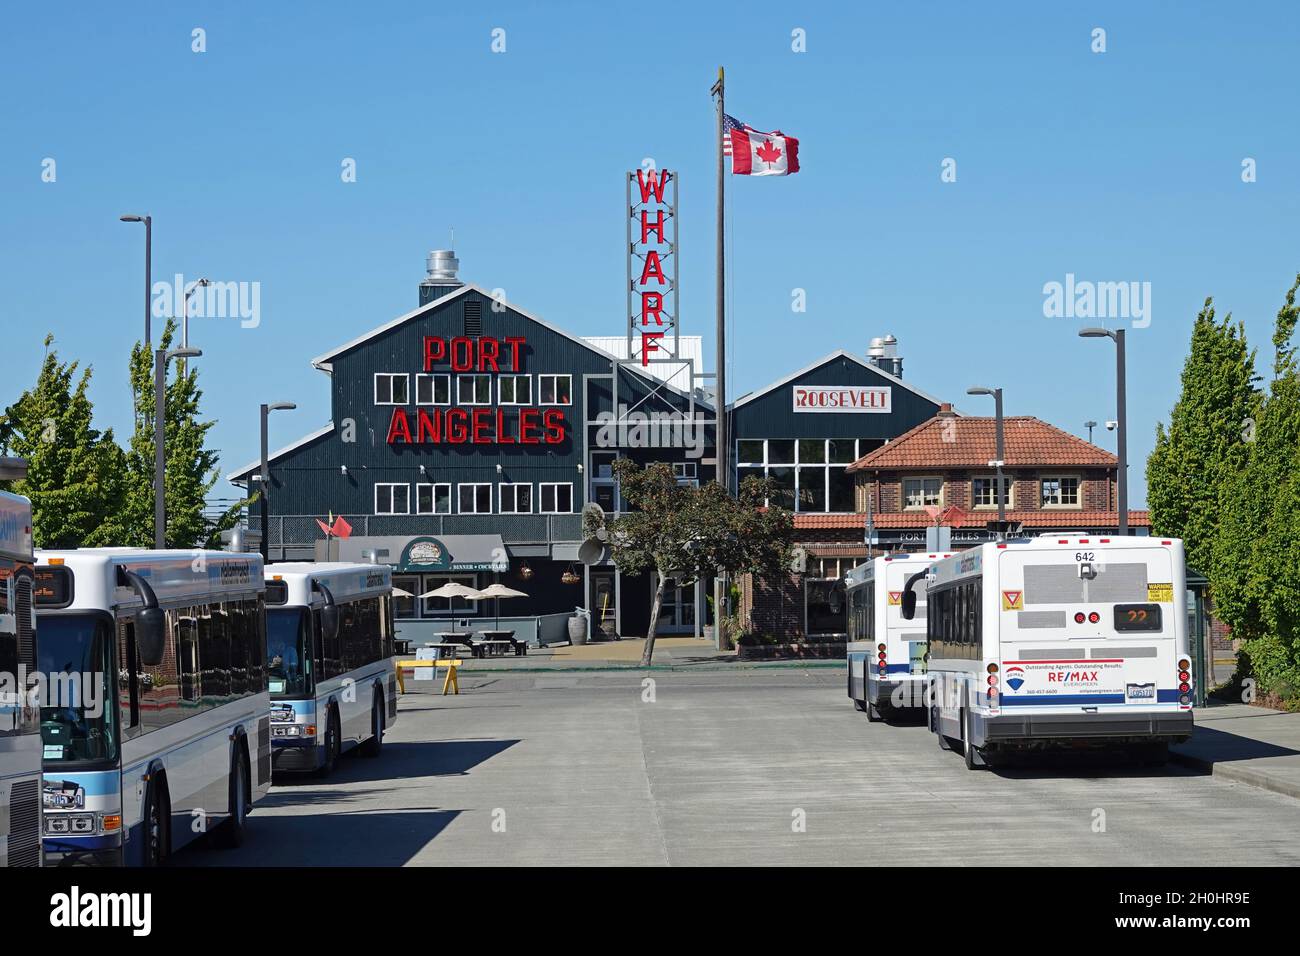 Port Washington, WA / USA - June 22, 2021: The Port Angeles Wharf is shown from an exterior view during a summer day. For editorial uses only. Stock Photo